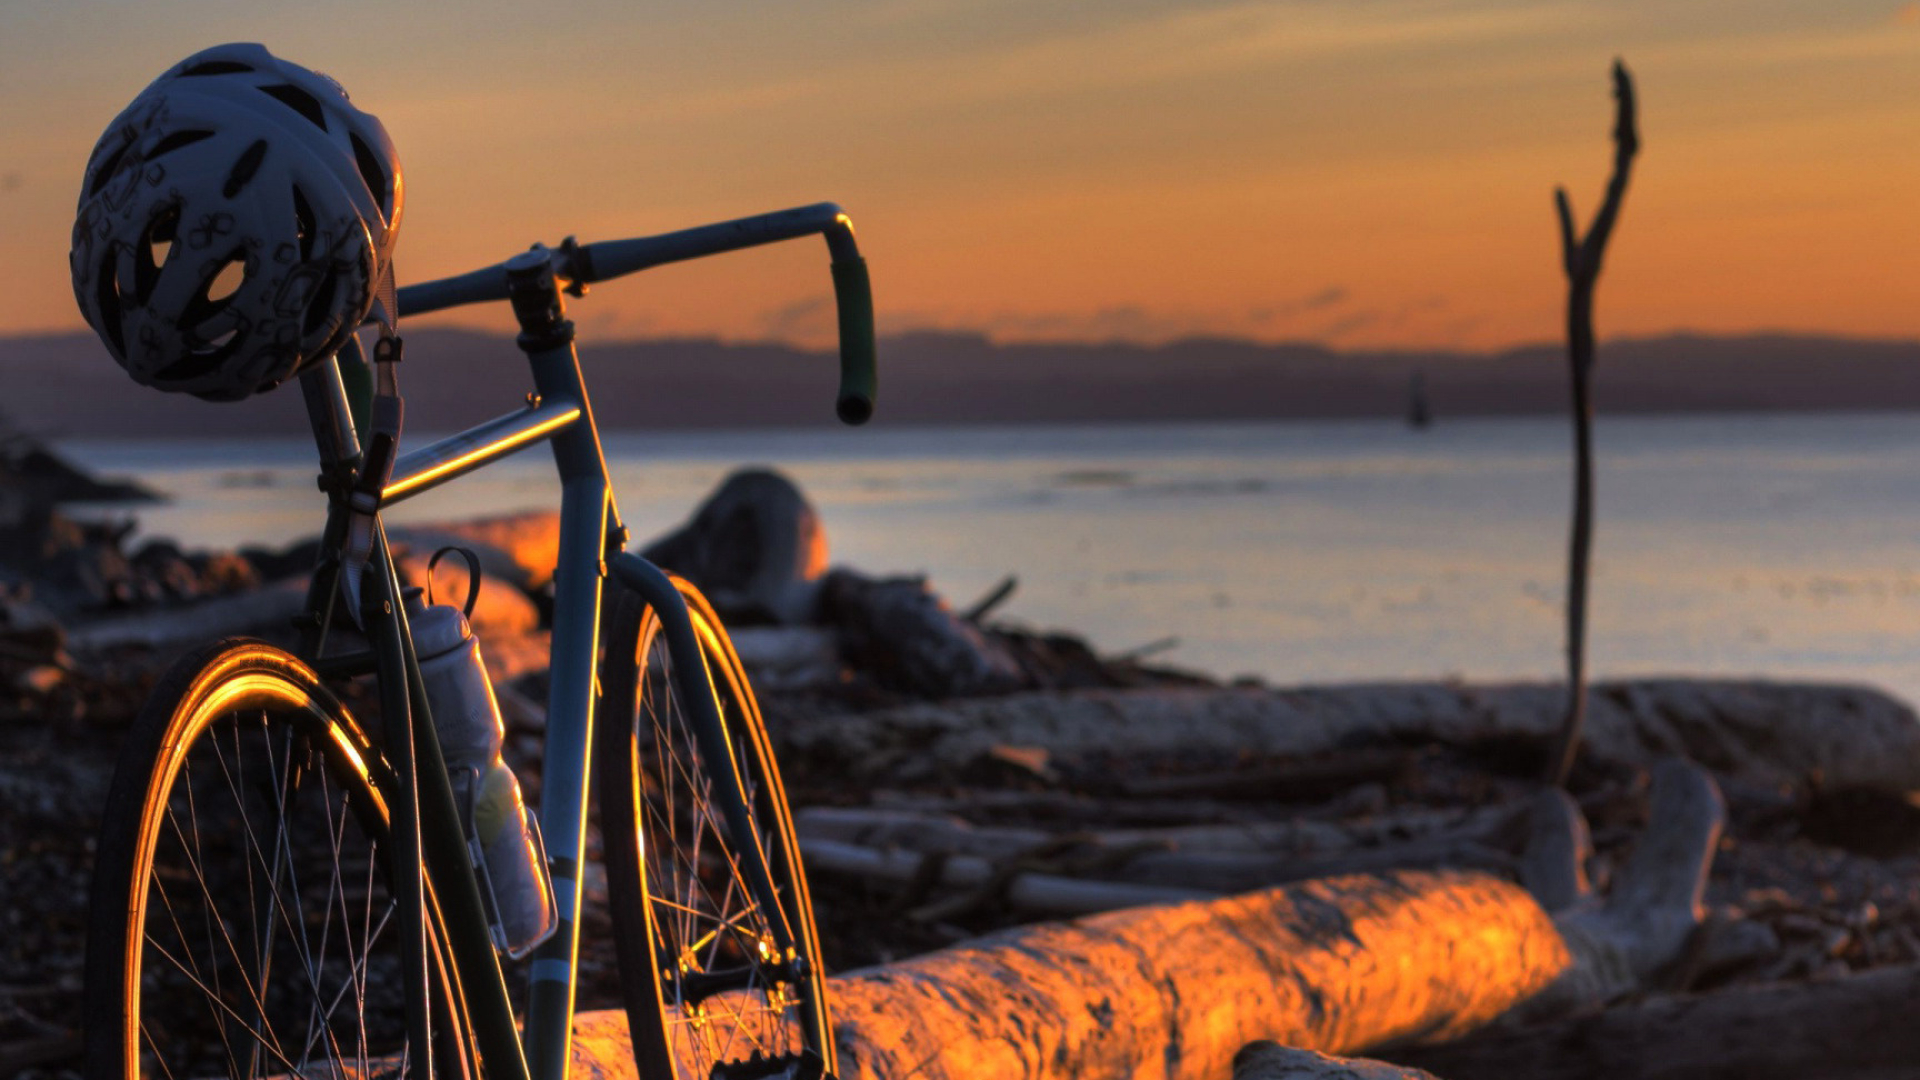 Bicycle in the sunset, Photography wallpapers, 1920x1080 Full HD Desktop